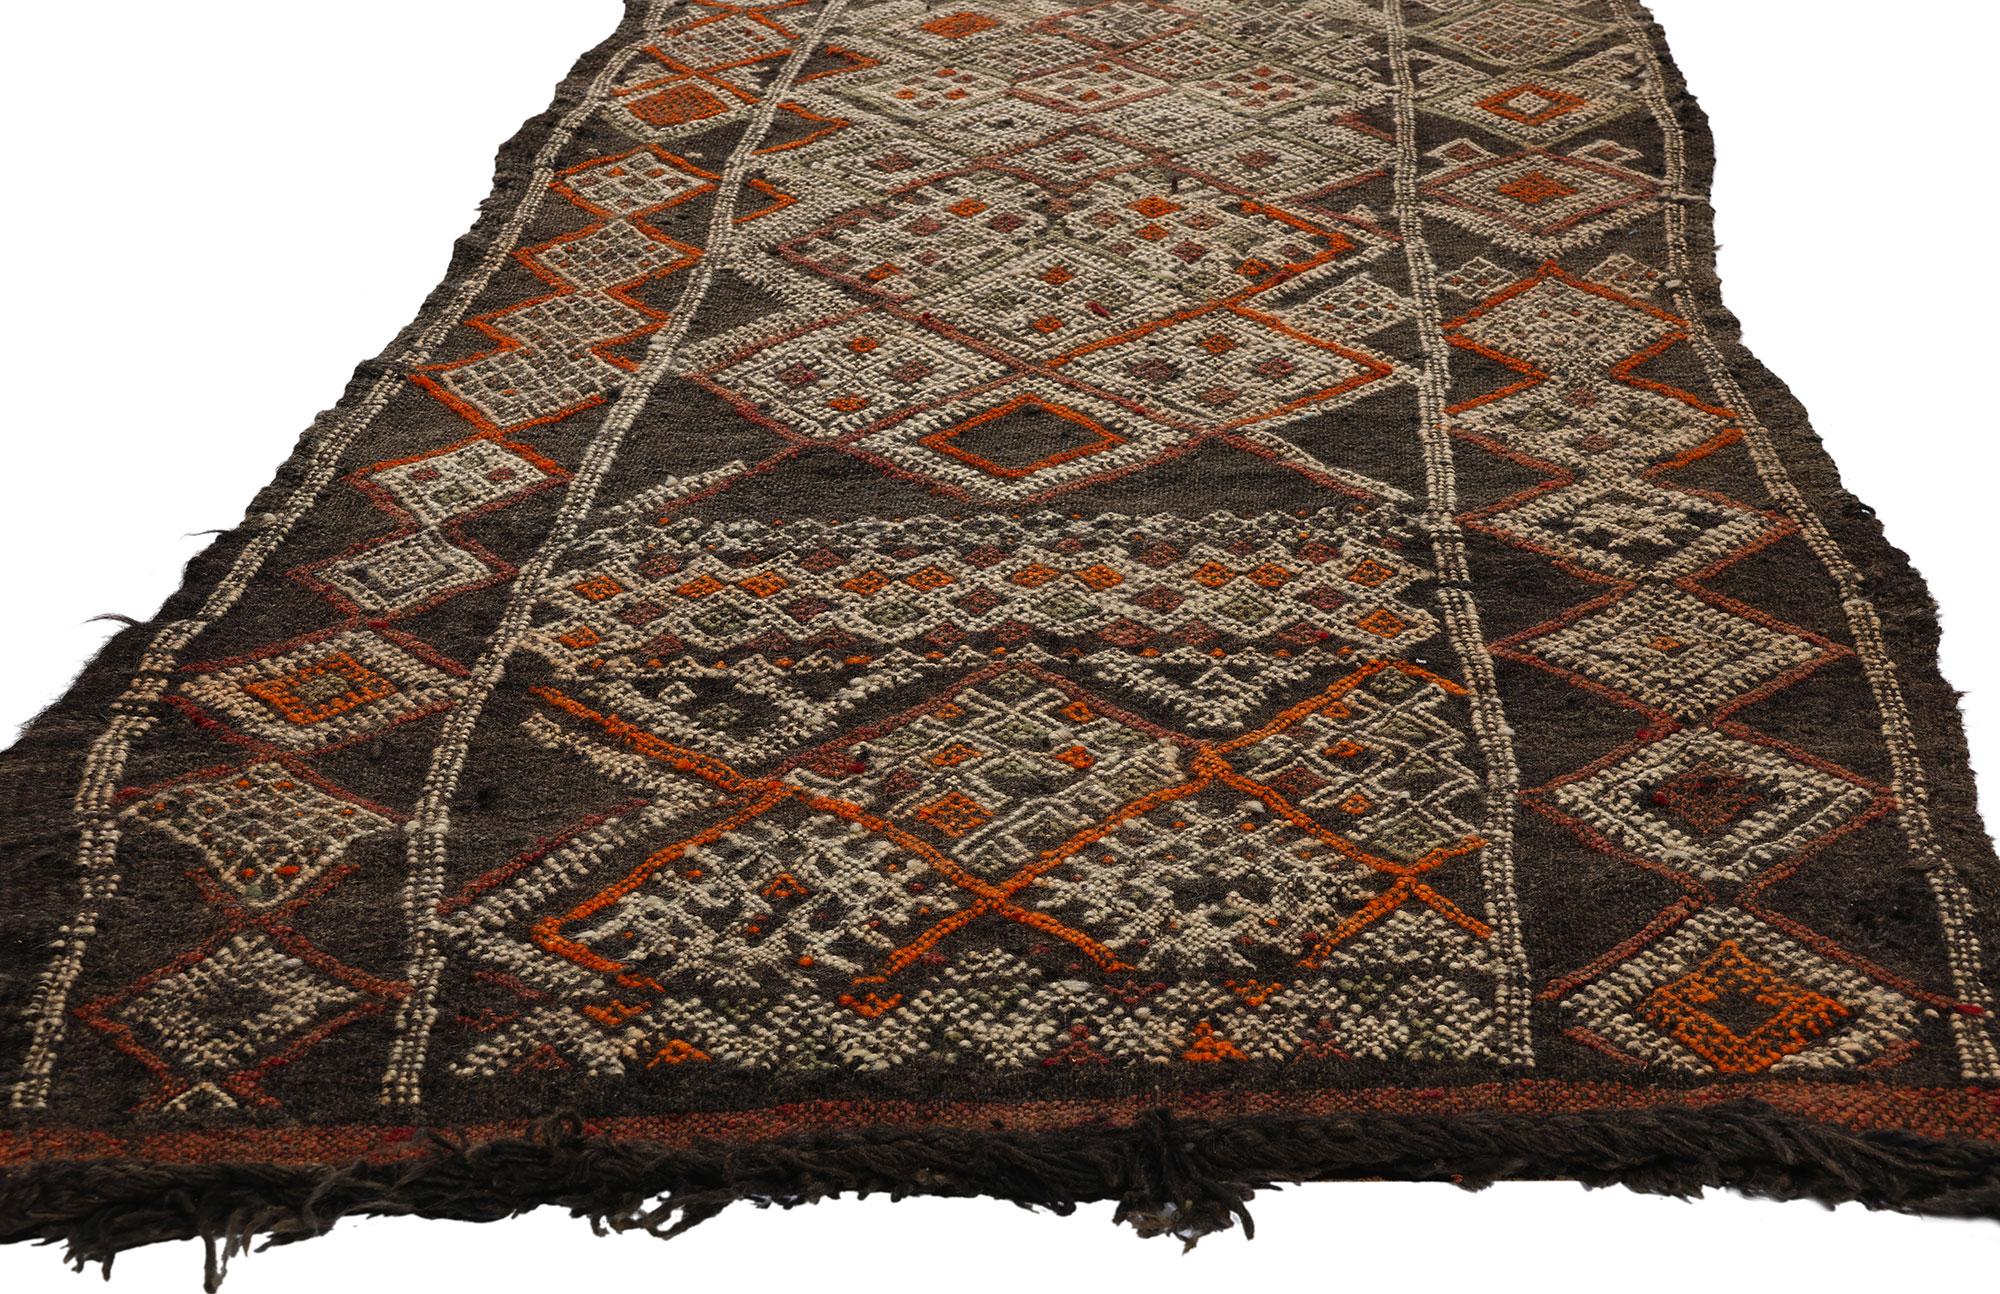 21779 Vintage Moroccan Zemmour Kilim Rug, 03'00 x 18'00. Introducing a captivating Moroccan kilim rug runner, intricately handwoven by the skilled artisans of the Zemmour Tribe nestled in the scenic Middle Atlas Mountains of Morocco. Infused with